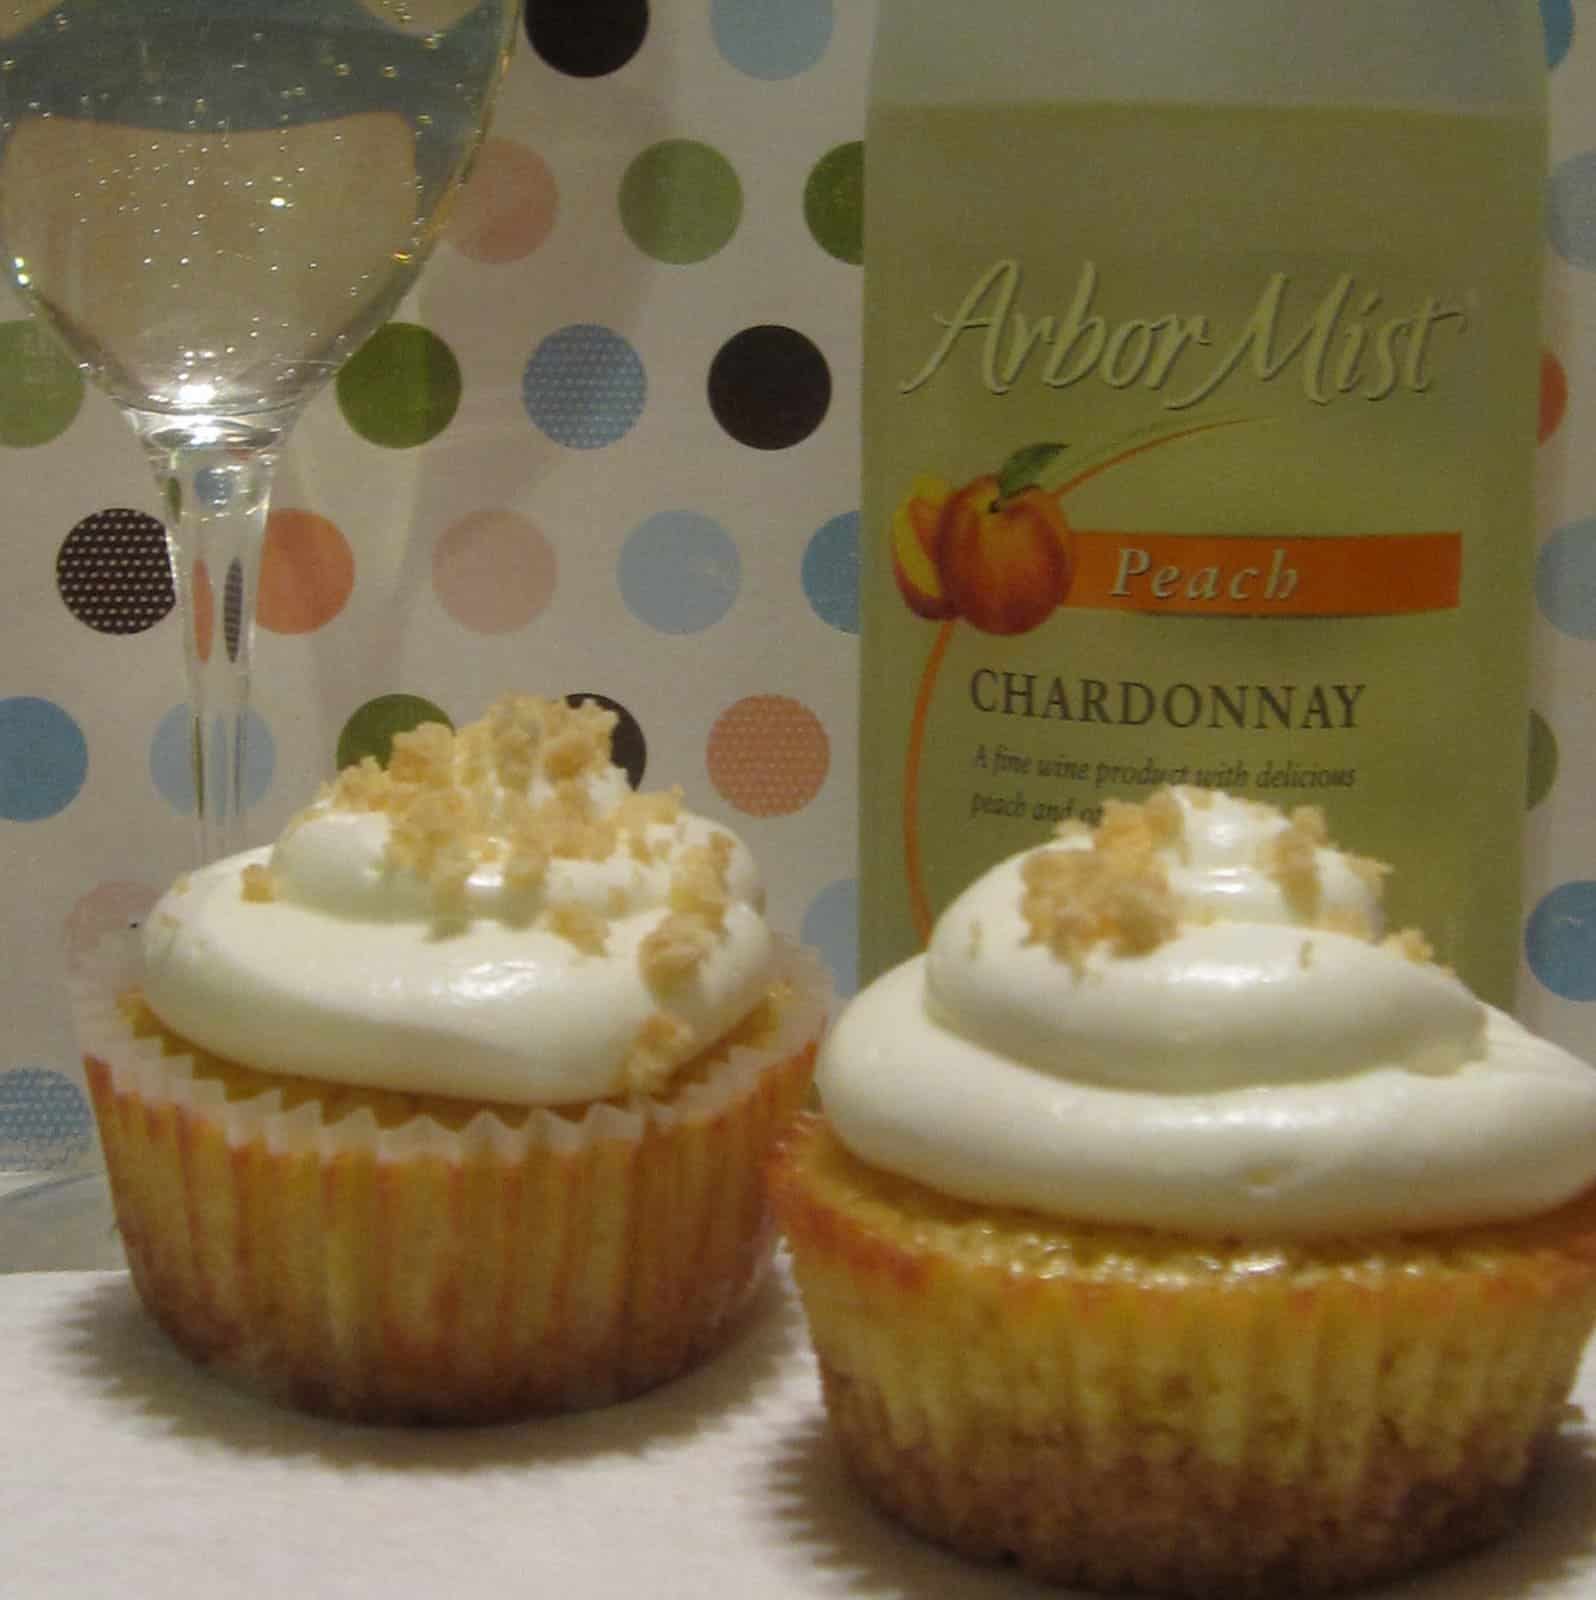 Side view of two Peach Wine Cupcakes in front of a bottle and a glass of chardonnay